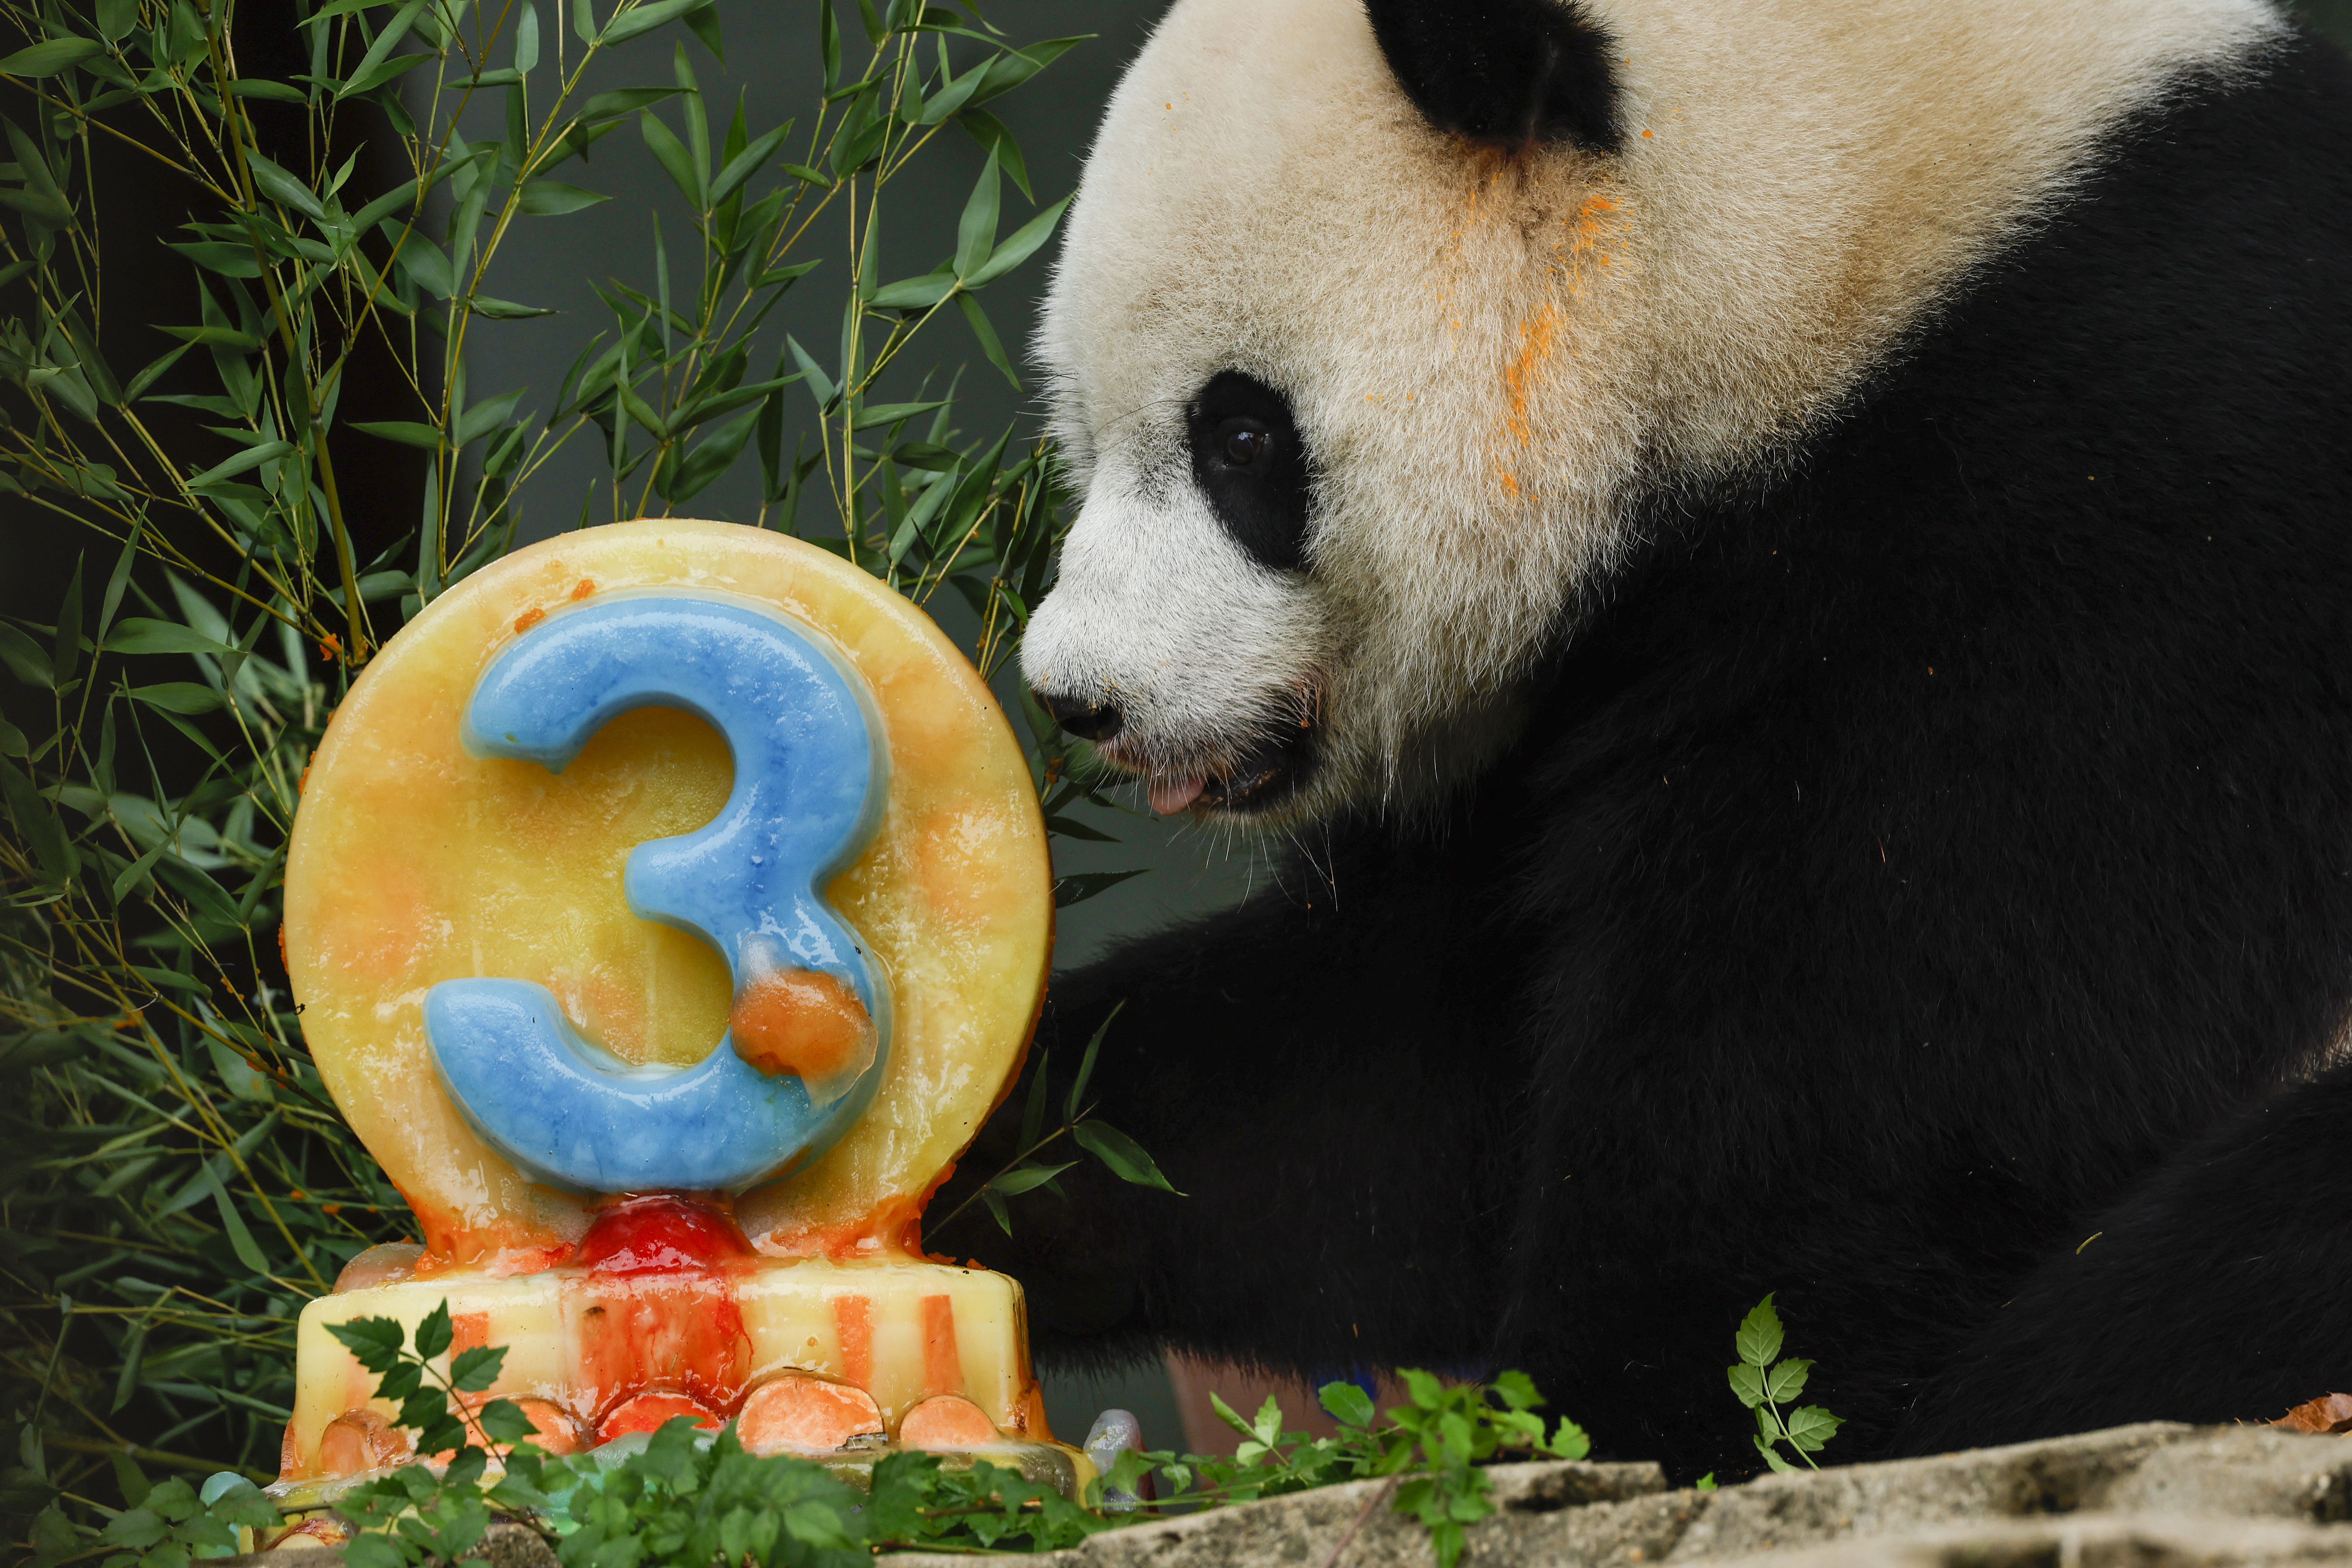 Giant panda club, Ziao Qi Ji celebrated its third birthday in the U.S. before it returns to China in December. /Anna Moneymaker / GETTY IMAGES NORTH AMERICA / Getty Images via AFP

